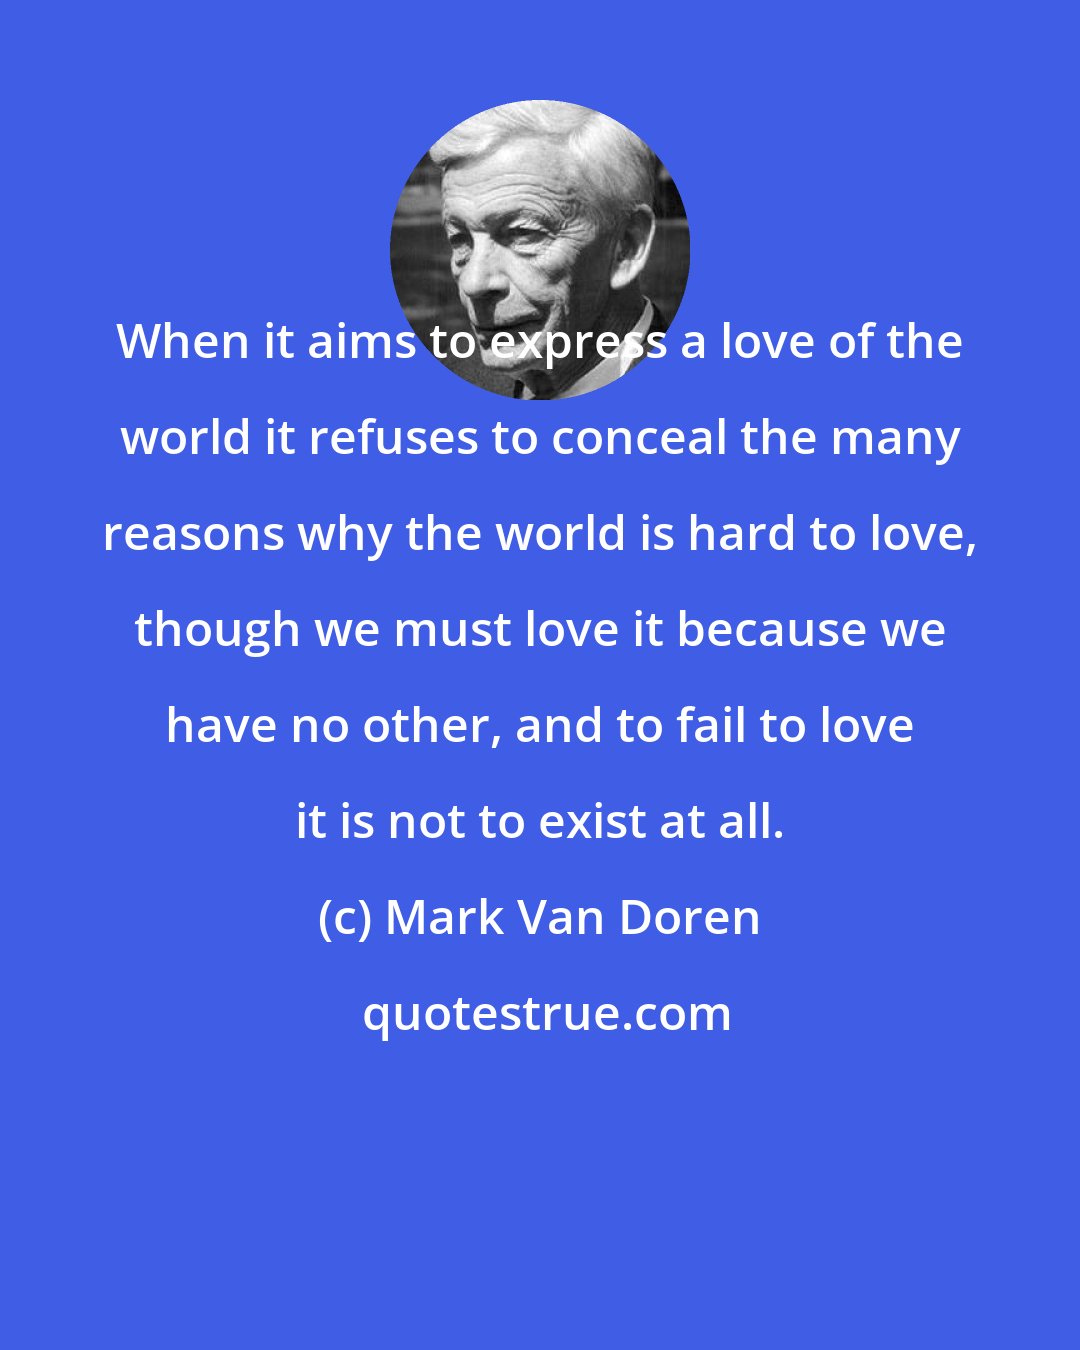 Mark Van Doren: When it aims to express a love of the world it refuses to conceal the many reasons why the world is hard to love, though we must love it because we have no other, and to fail to love it is not to exist at all.